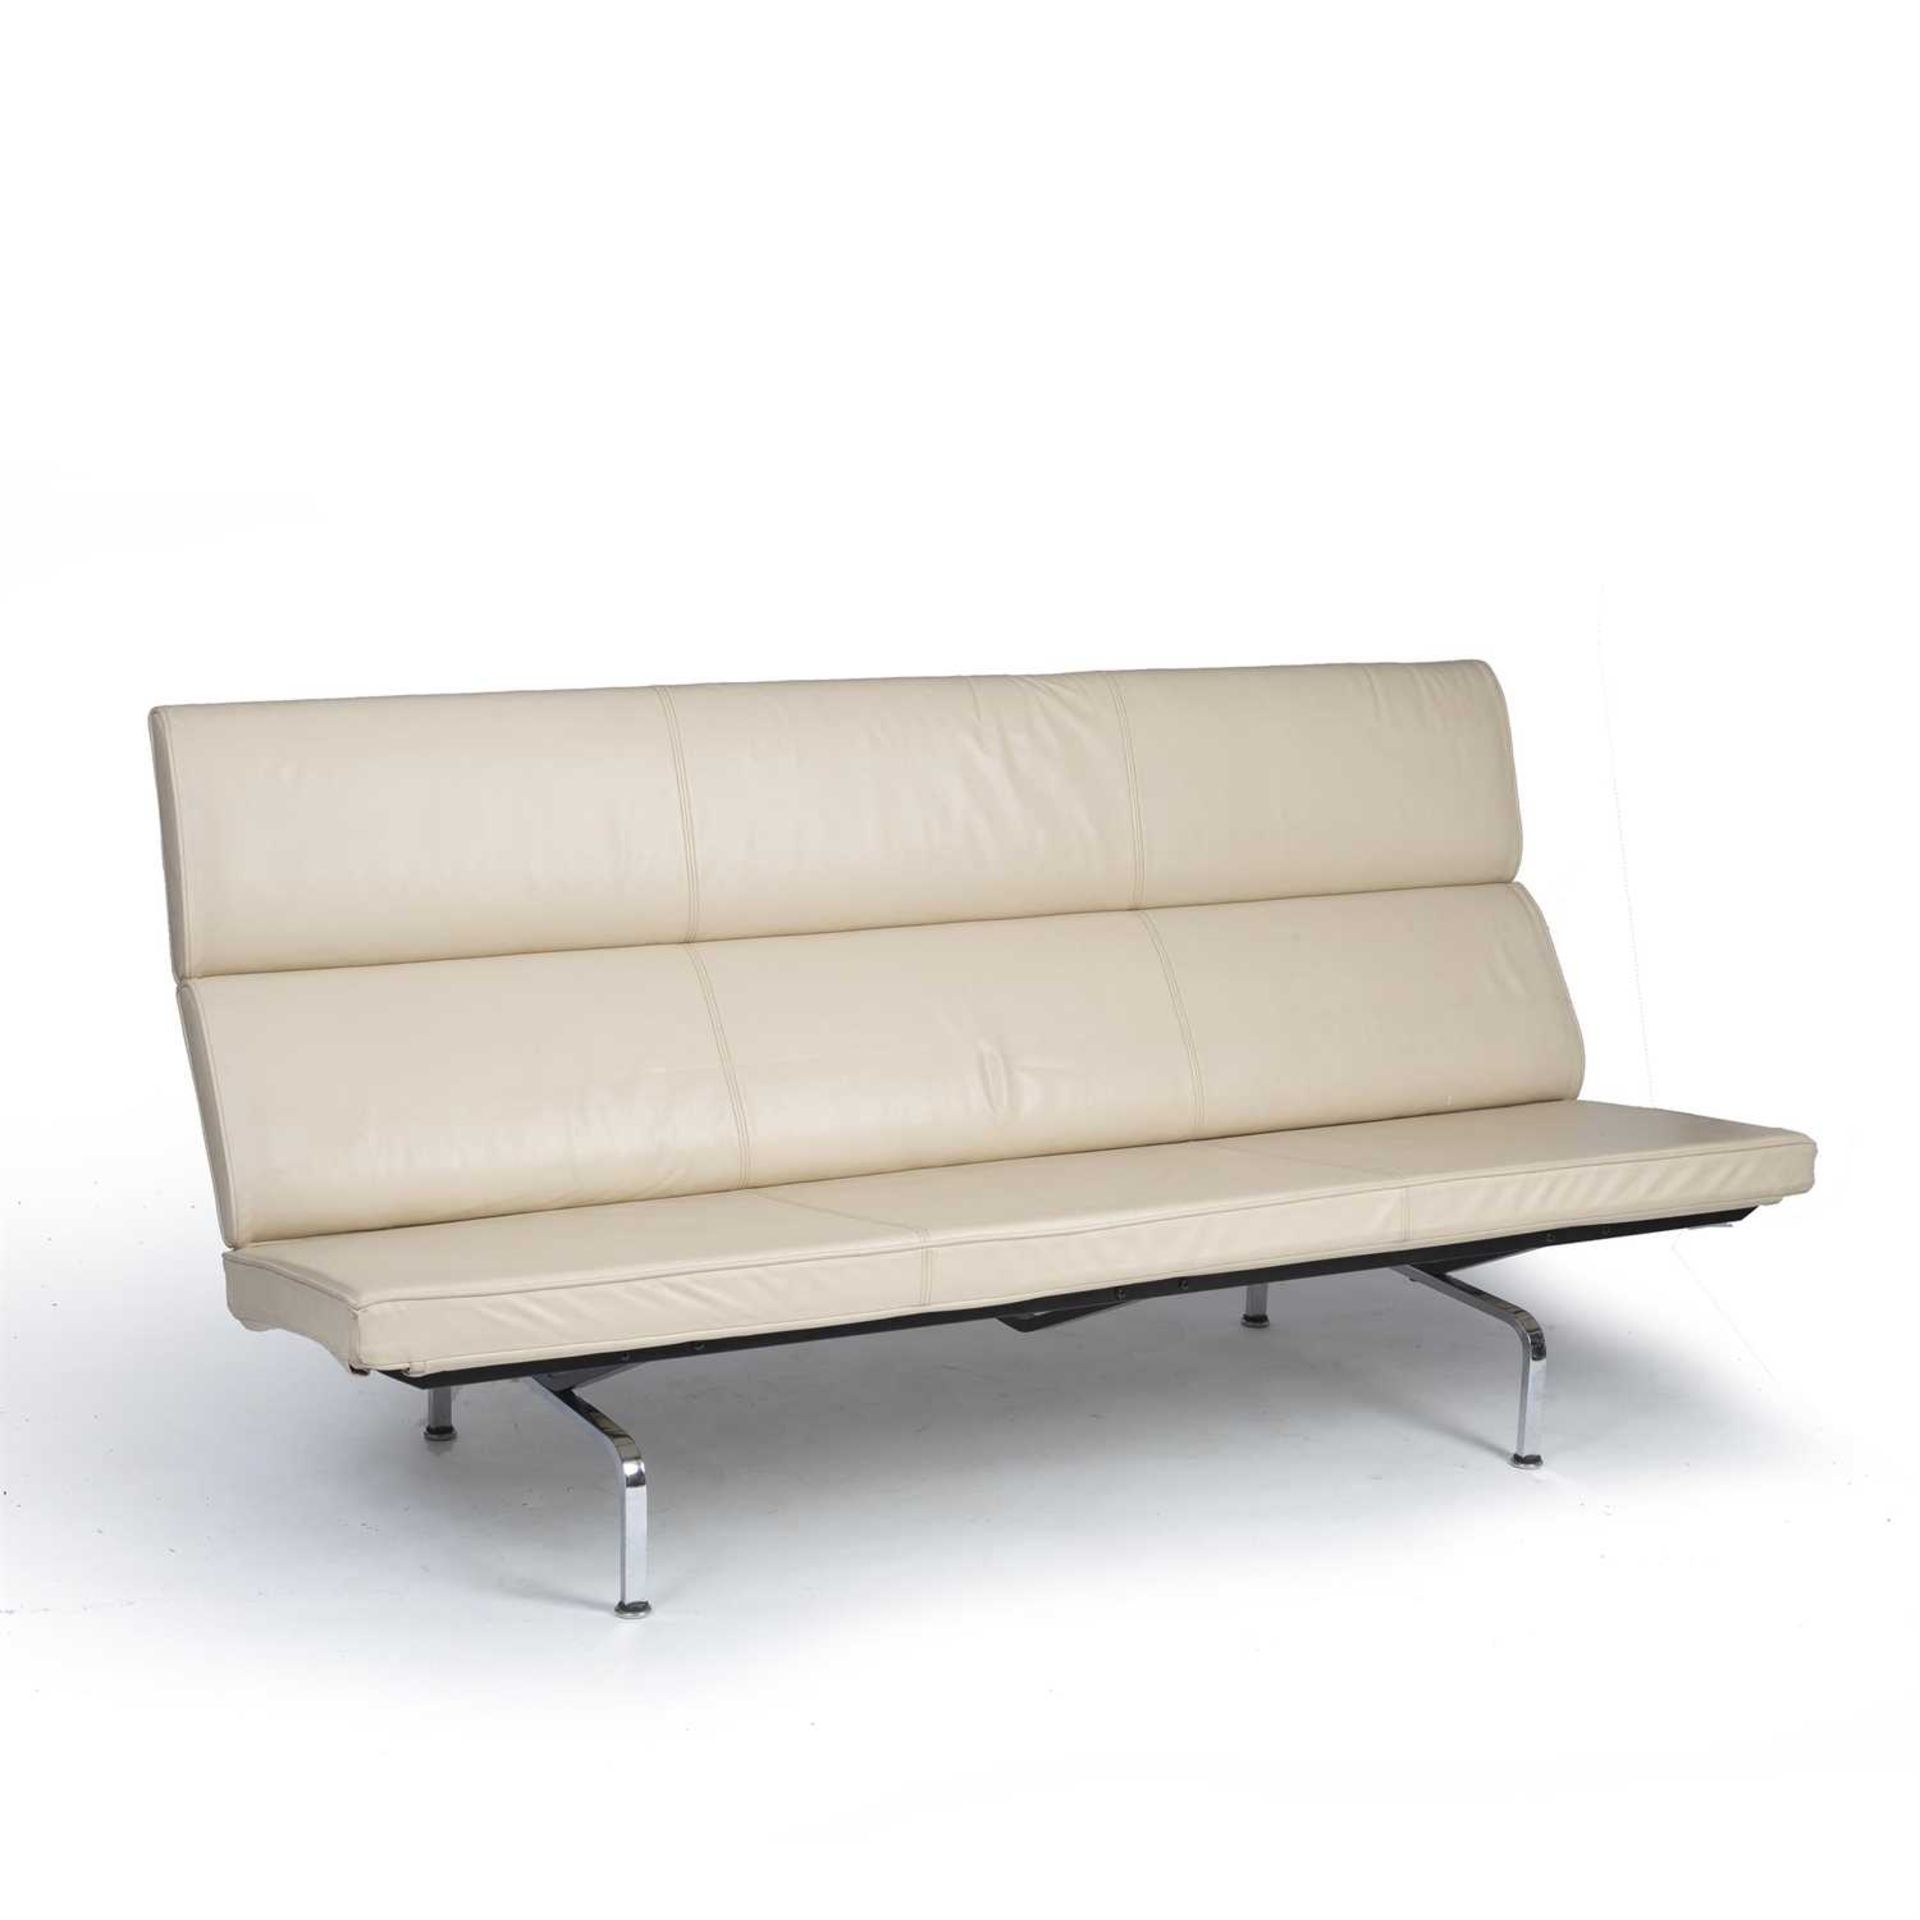 Charles and Ray Eames for Herman Miller Compact sofa upholstered in cream leather, over chromed